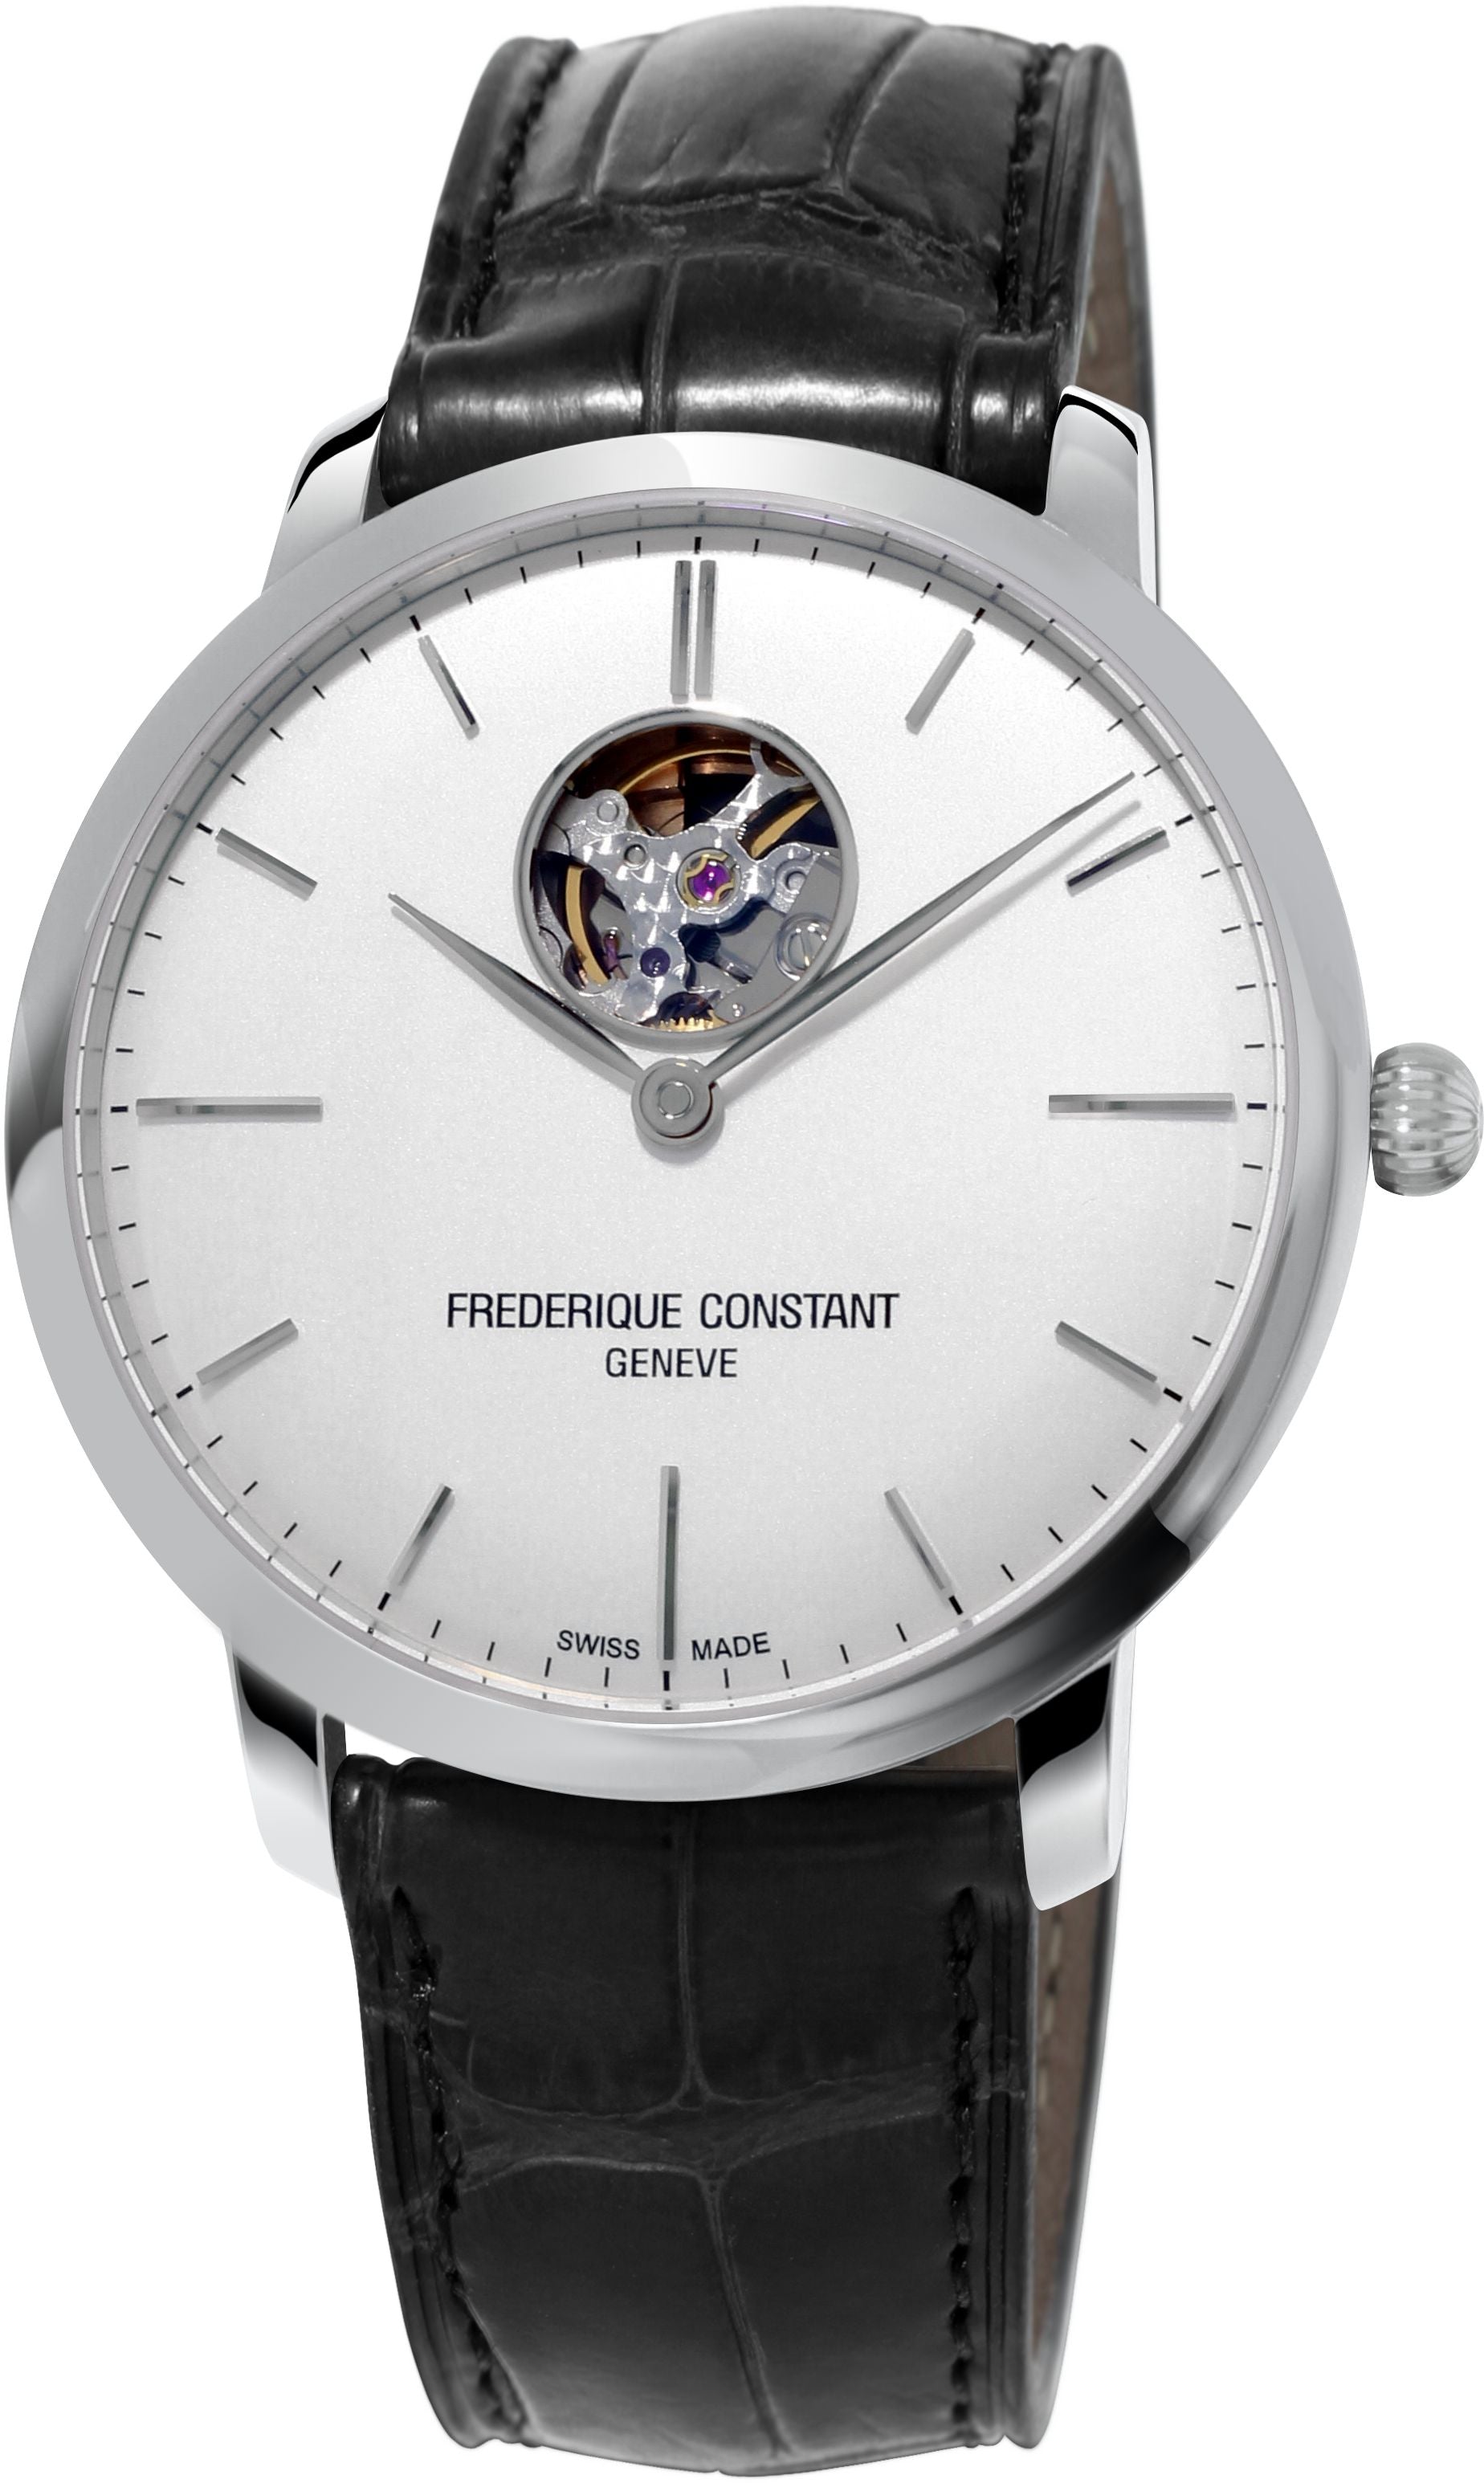 FREDERIQUE CONSTANT MENS STAINLESS STEEL Silver-Tone Automatic SLIMLINE Leather Strap